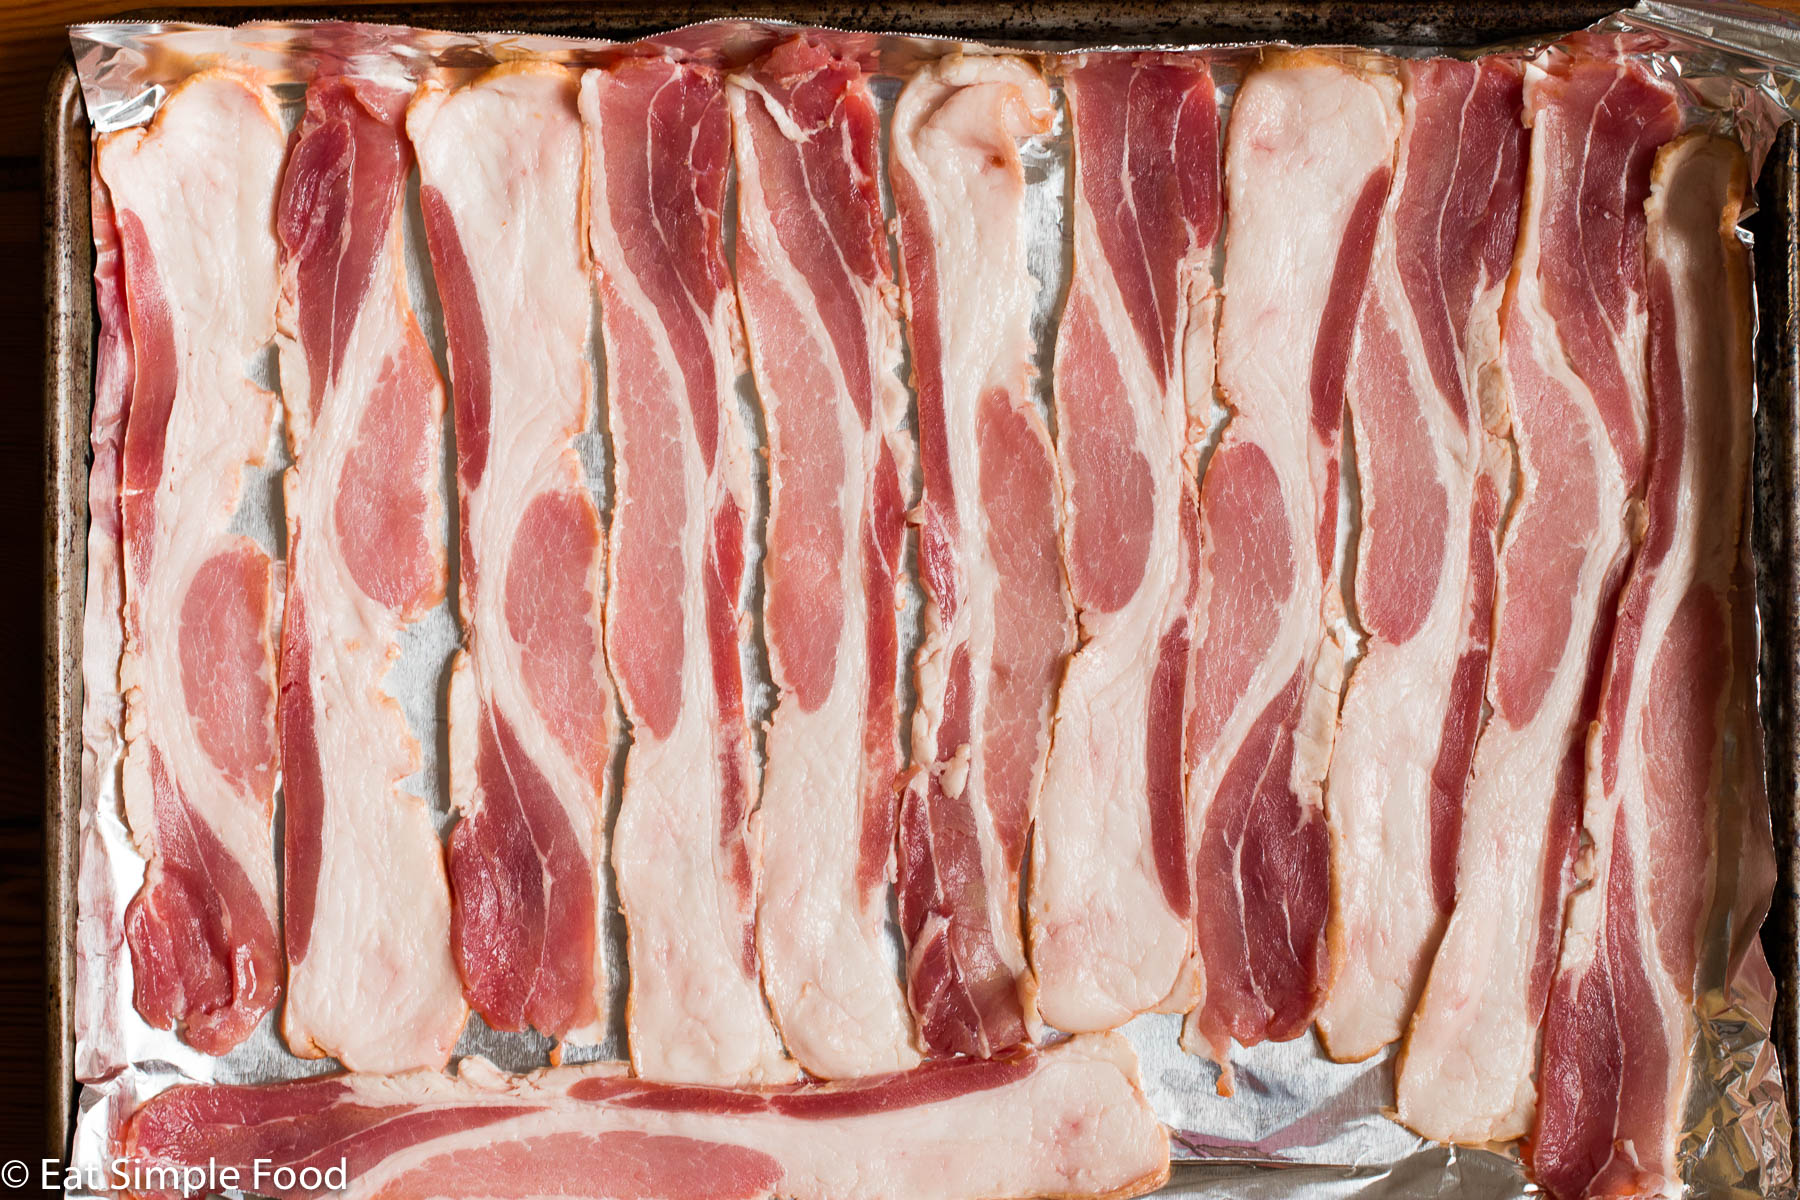 Raw bacon snuggled together on a sheet pan. Top view, close up.